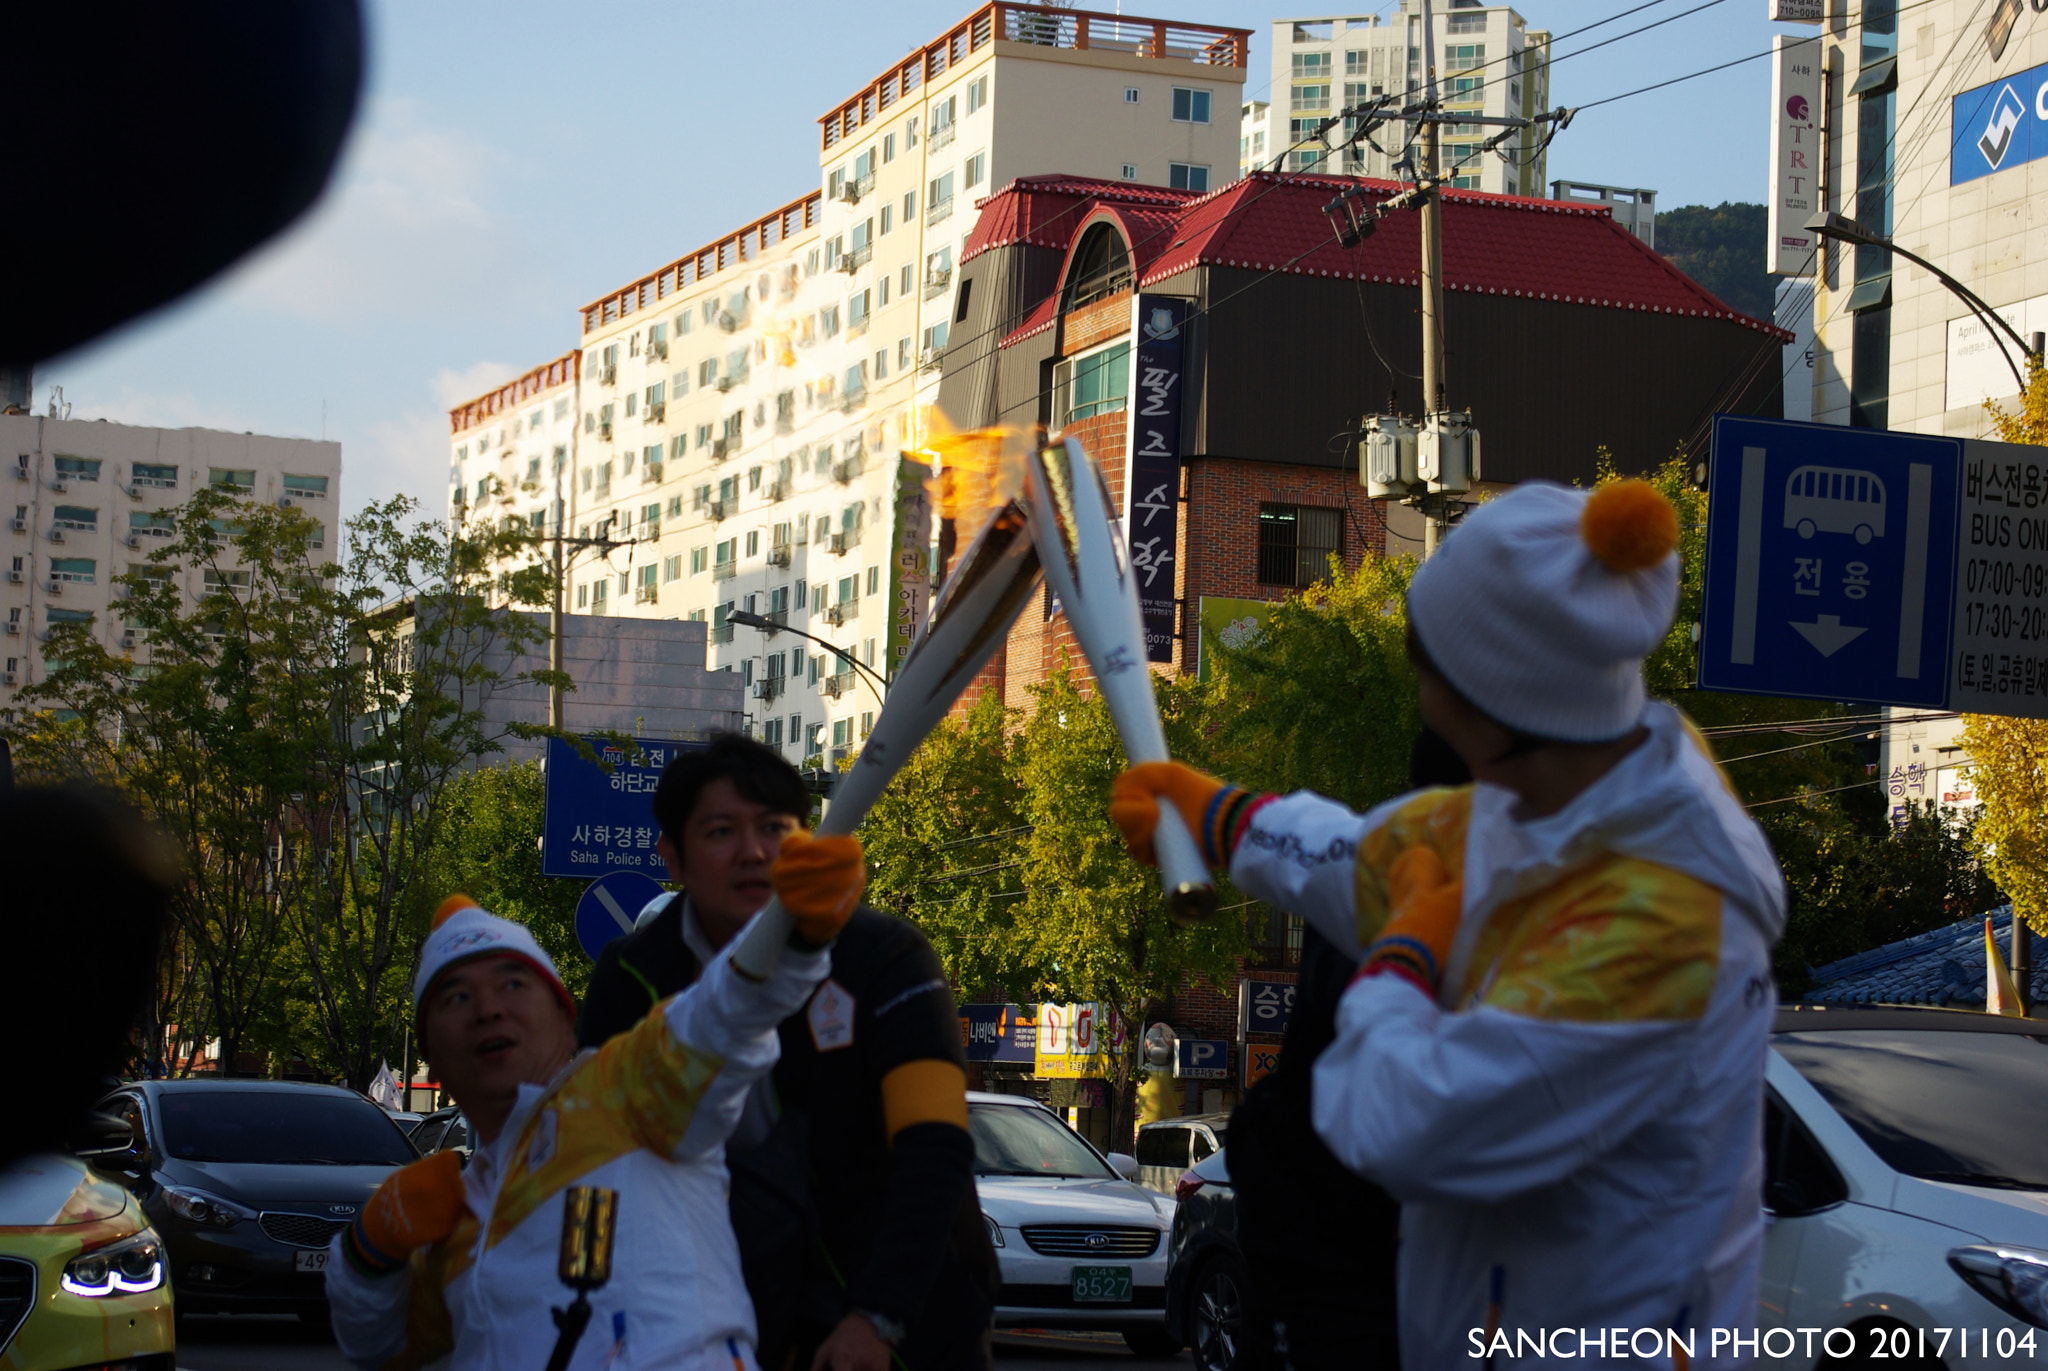 Samsung GX-10 sample photo. Olympic torch photography